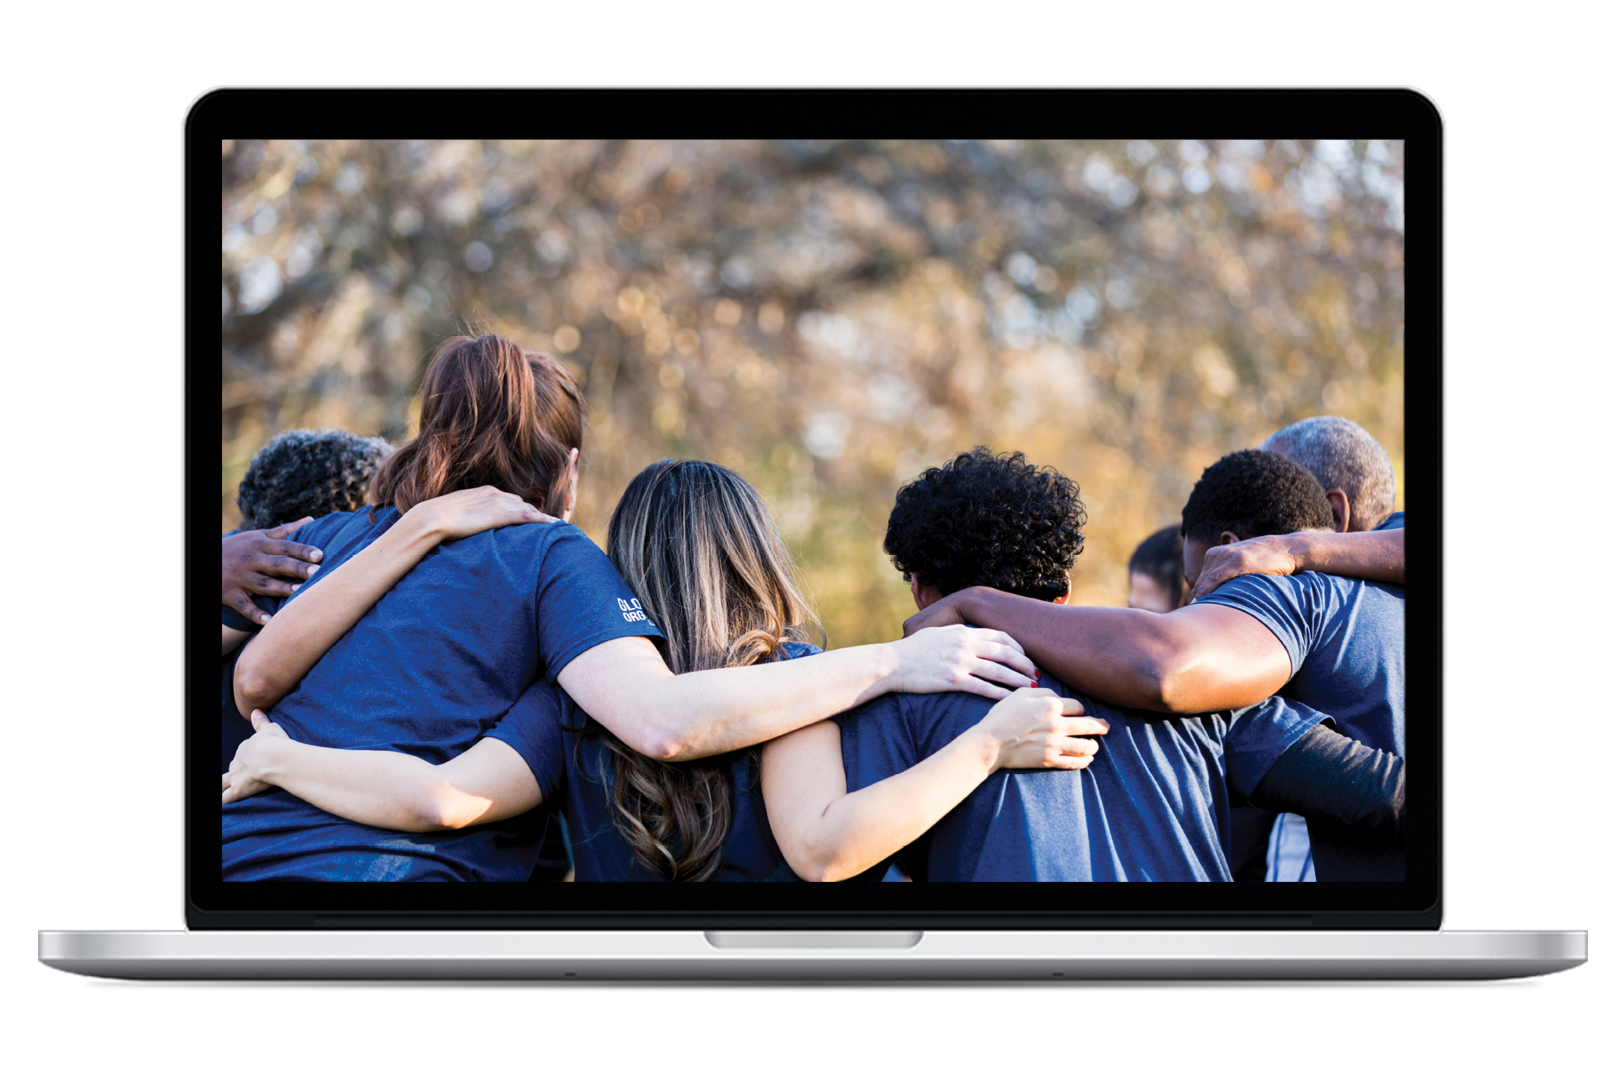 Laptop displaying an image of a group of people holding each other arm in arm